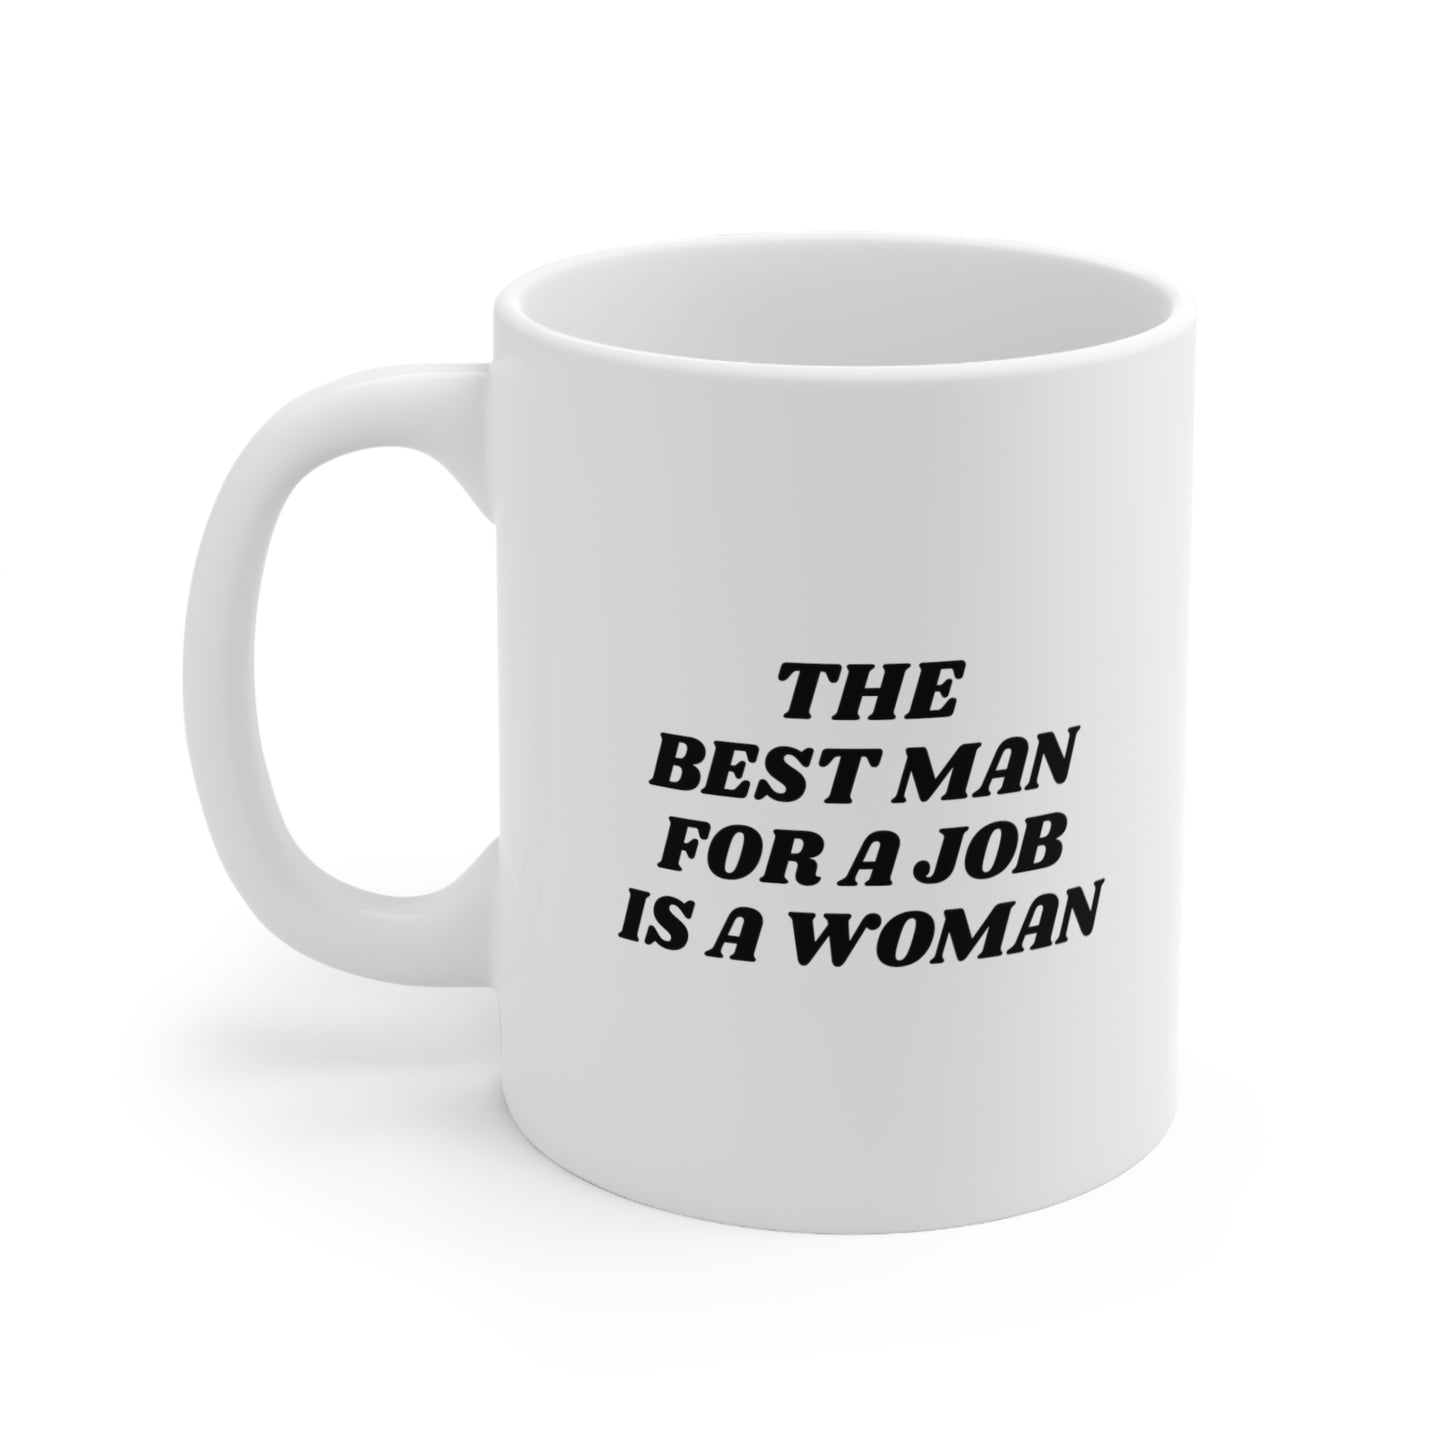 The Best Man For a Job is a Woman Coffee Mug